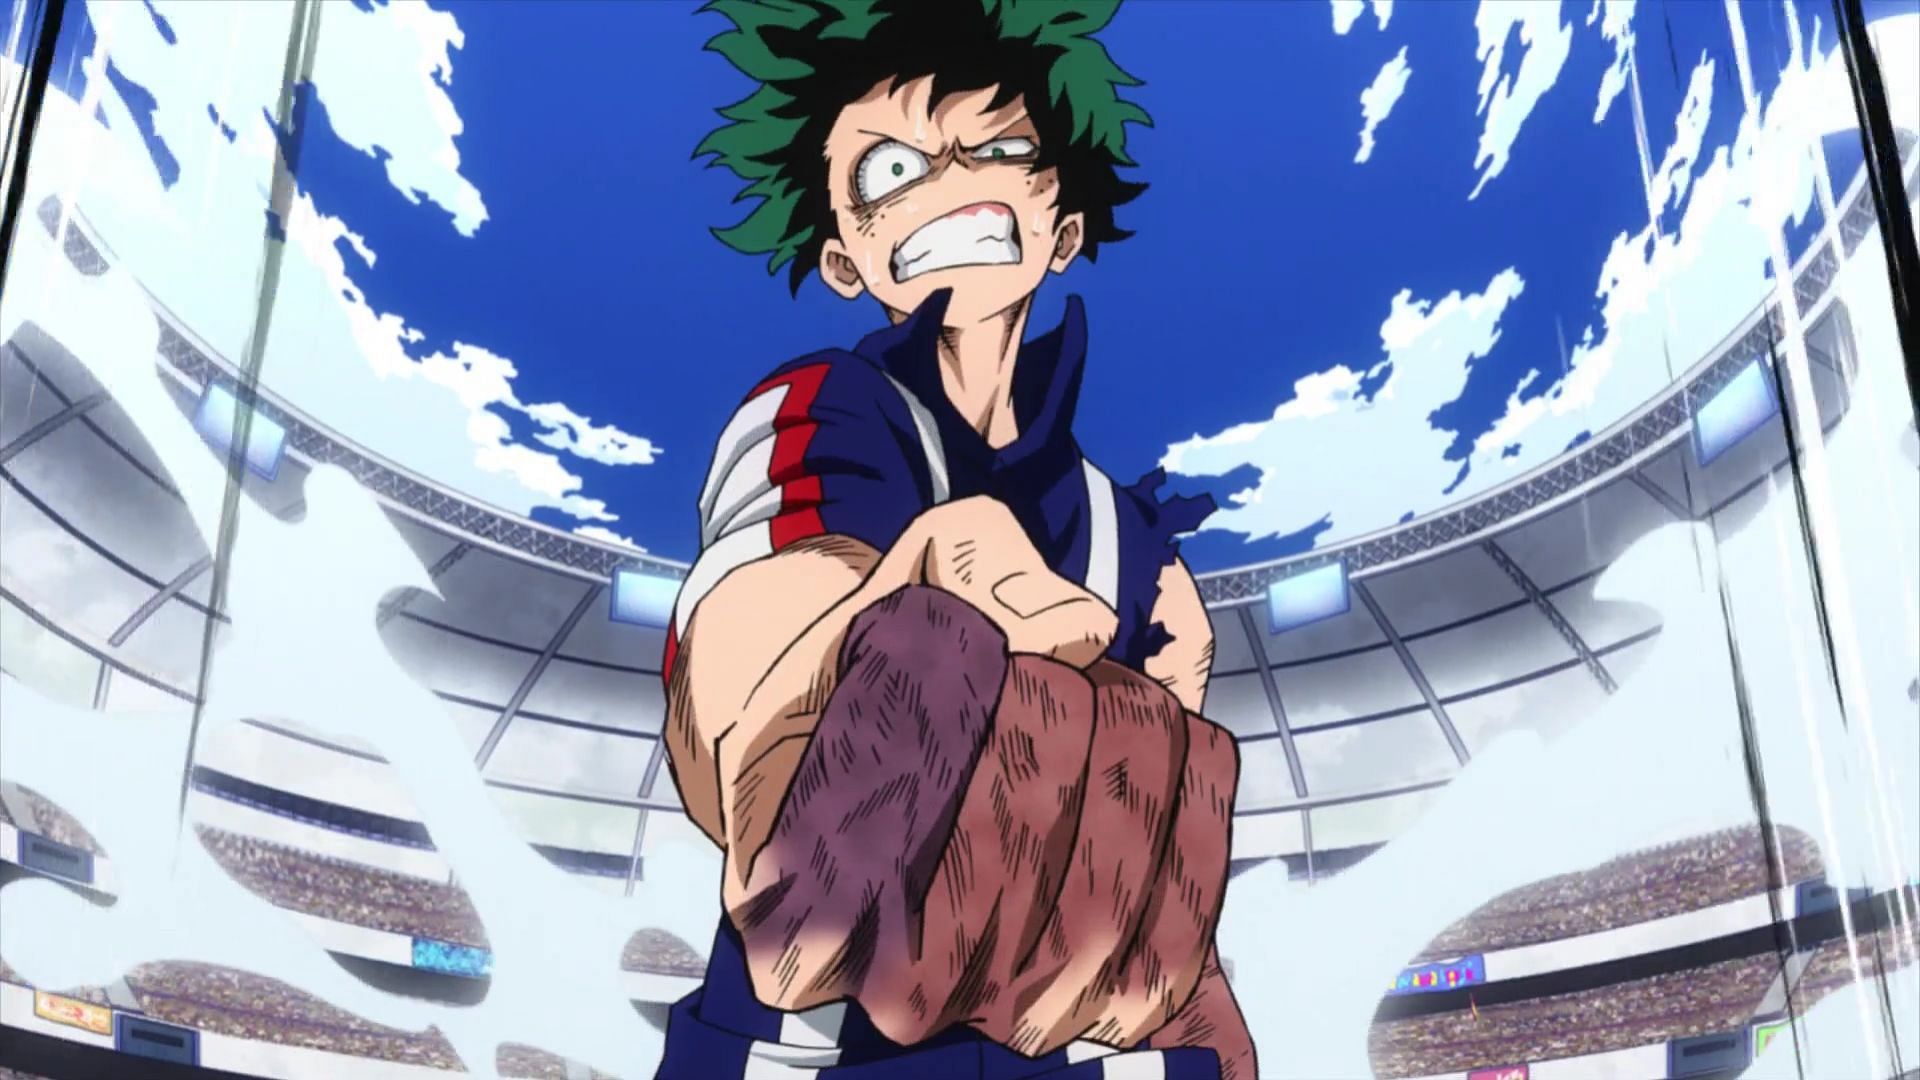 My Hero Academia chapter 414: Deku prepares to transfer another Quirk after the second user weakens Shigaraki (Image via BONES)